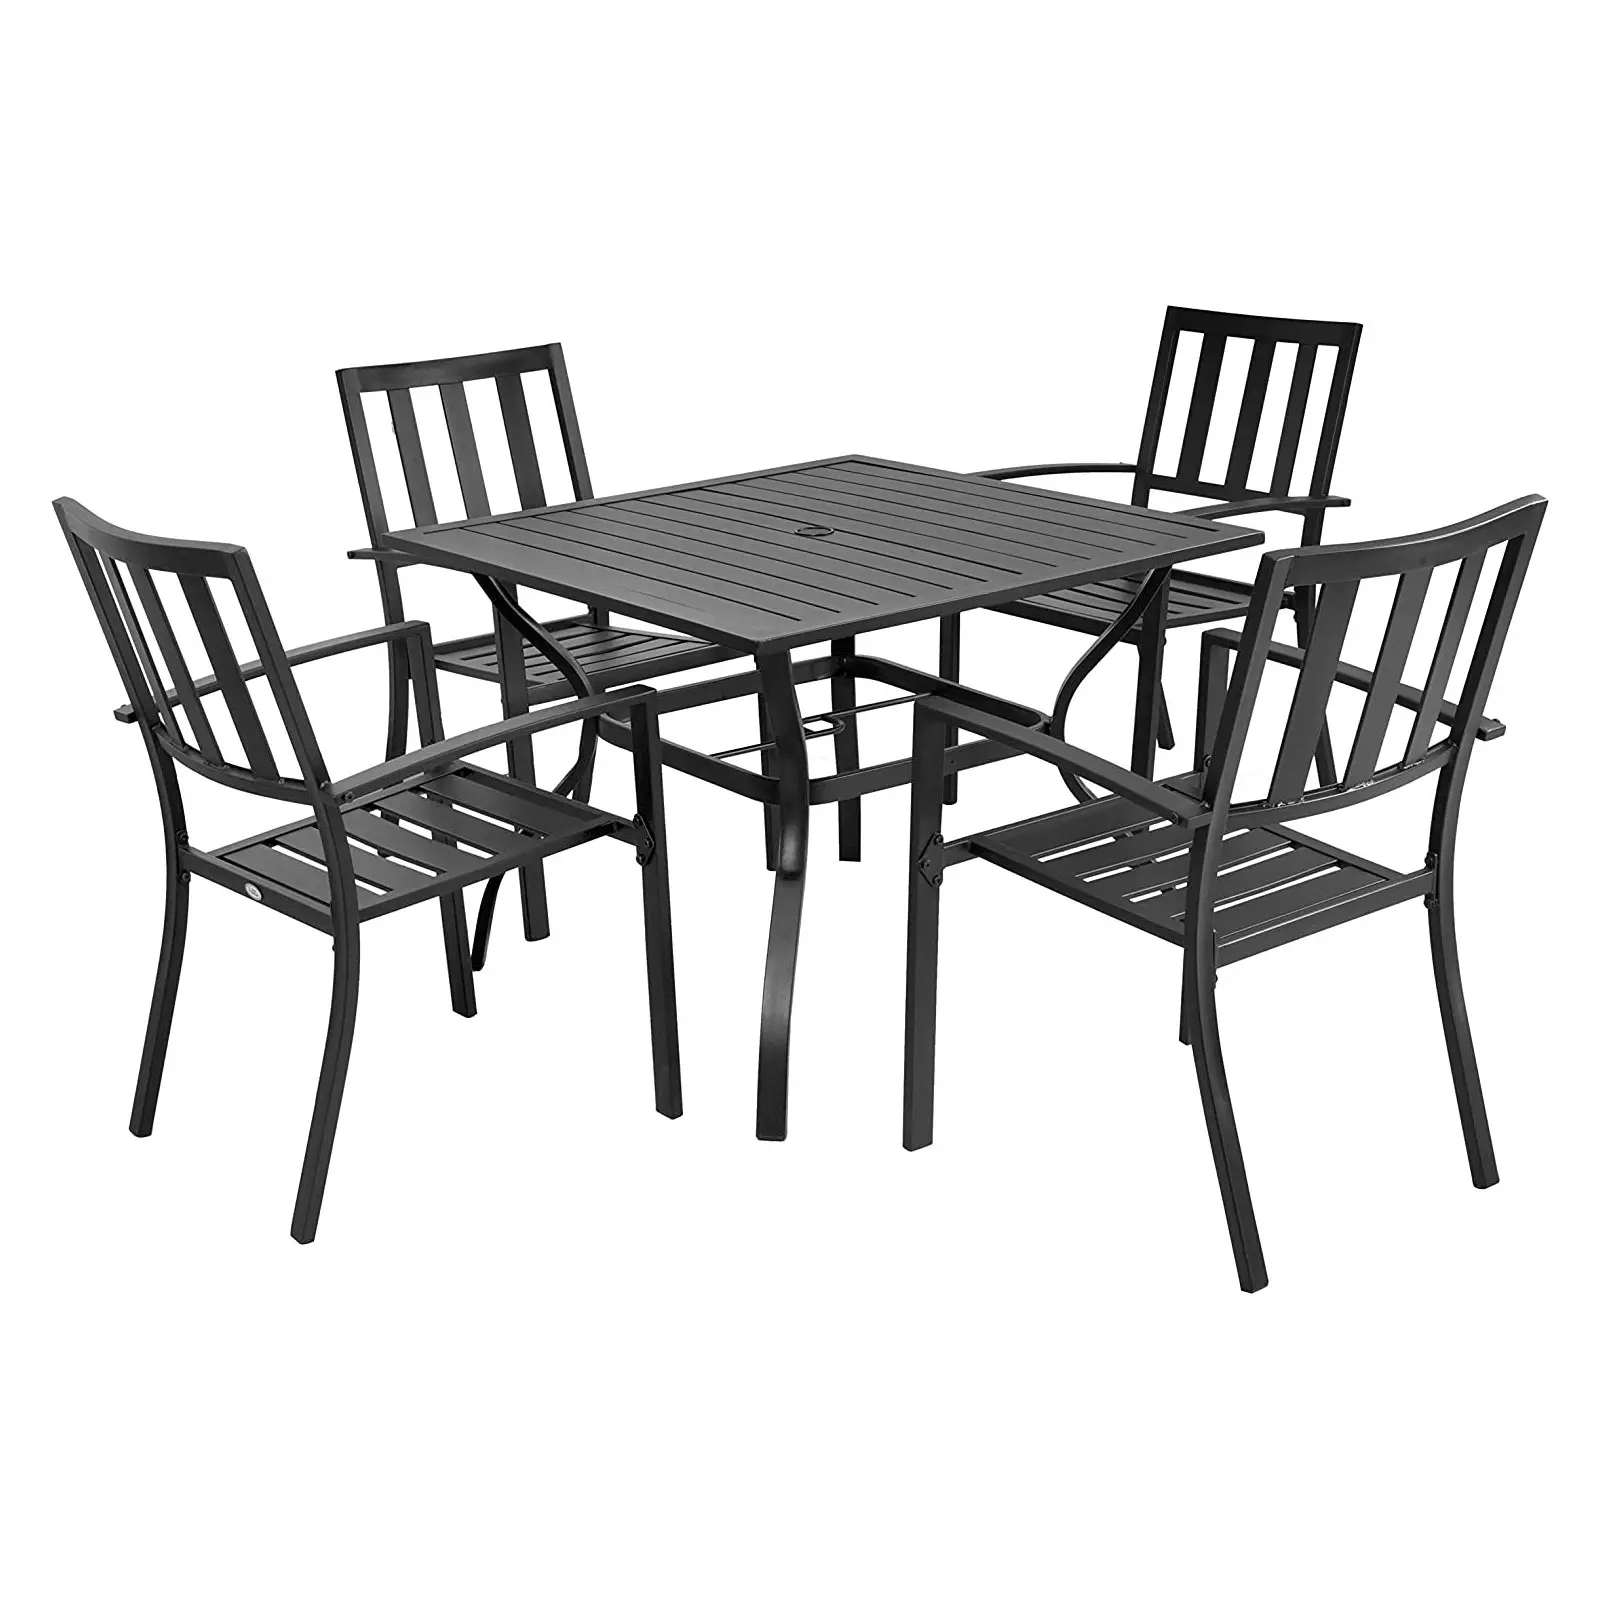 5 Piece Outdoor Patio Bistro Metal Dining Chair Table with Umbrella Hole